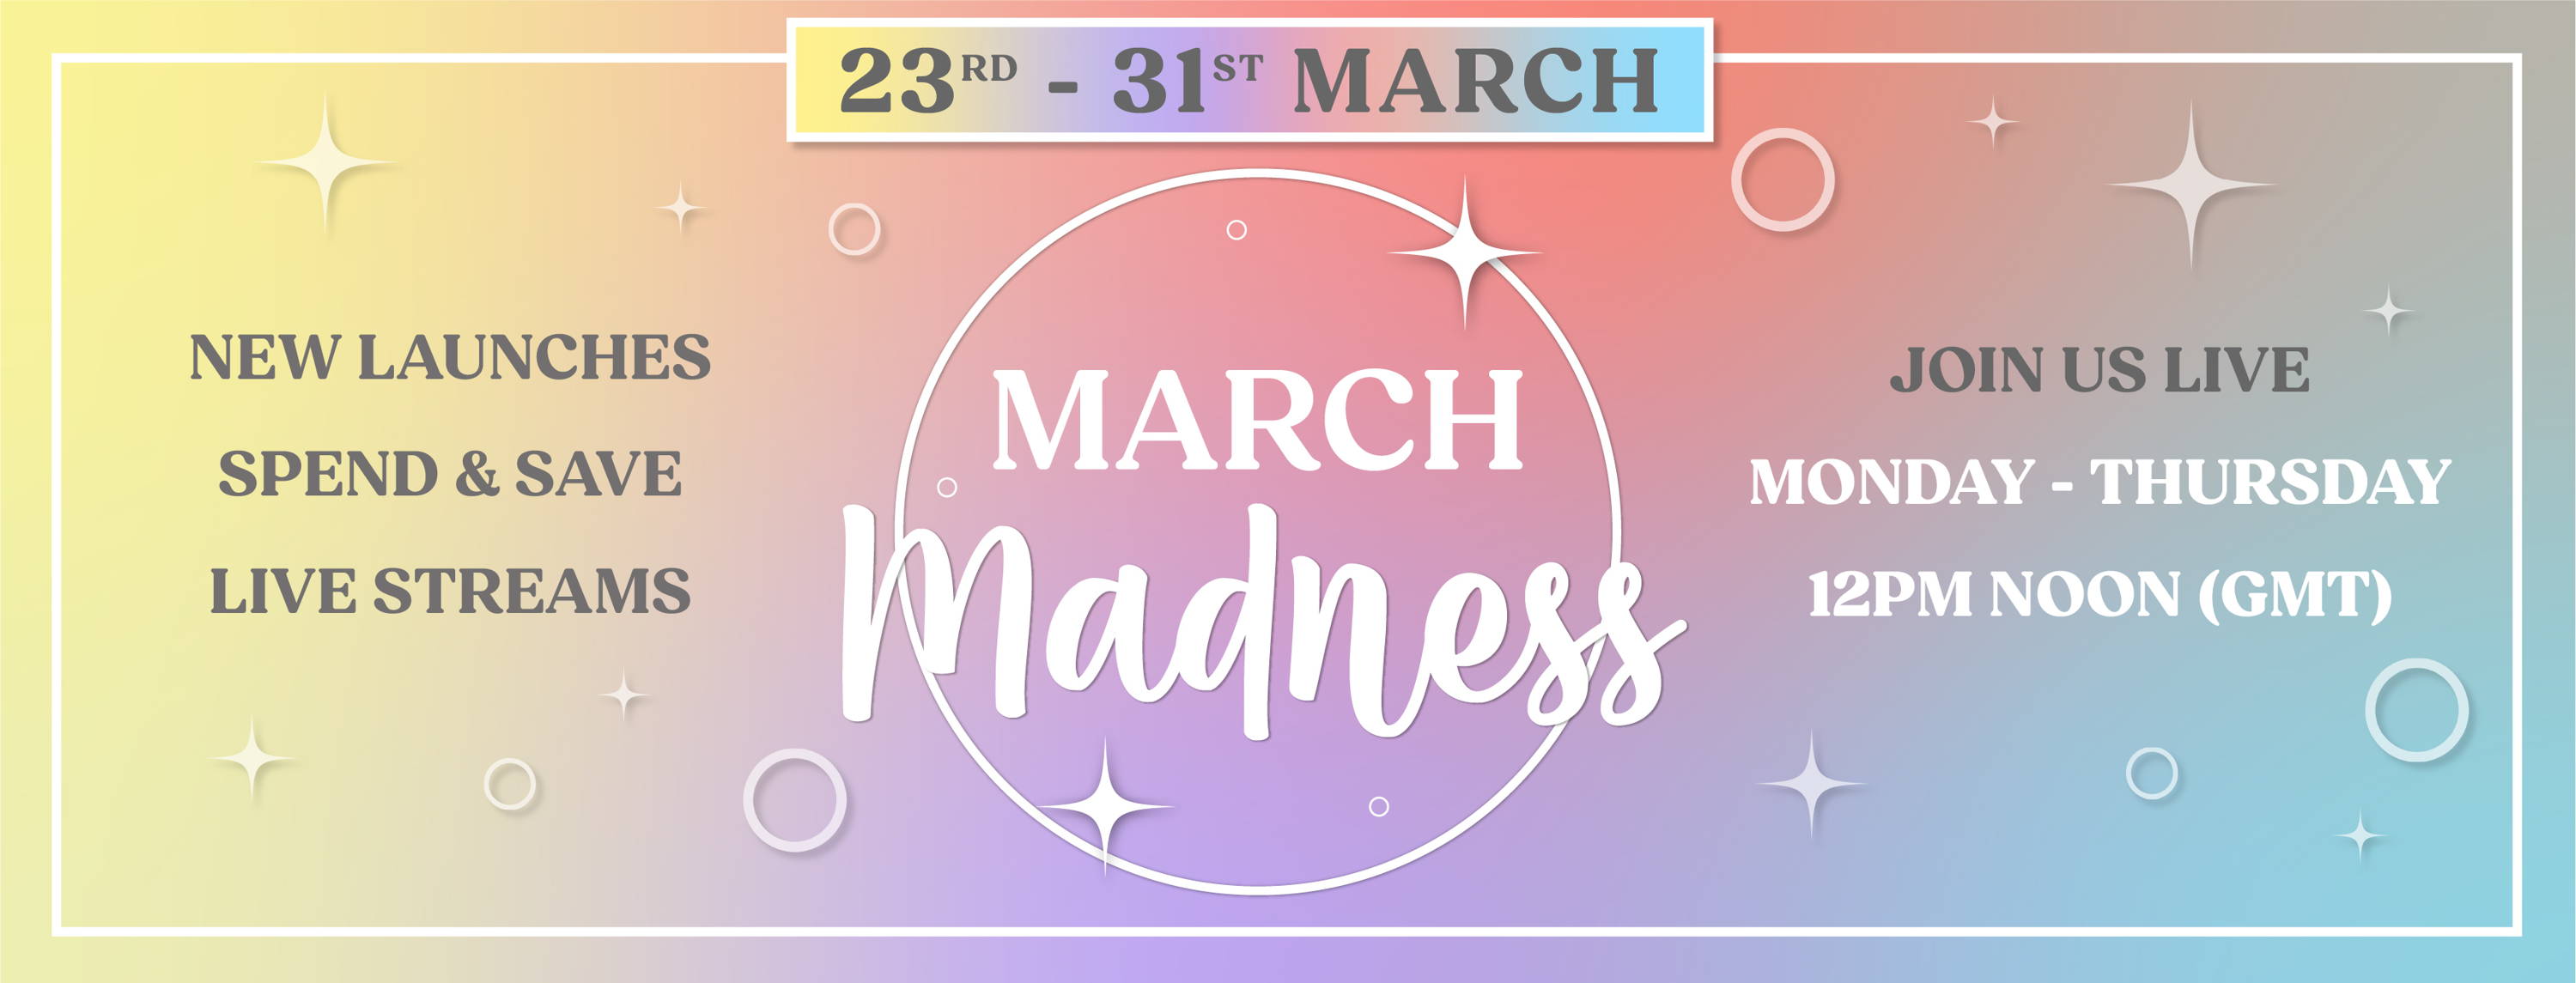 March Madness Sale Banner